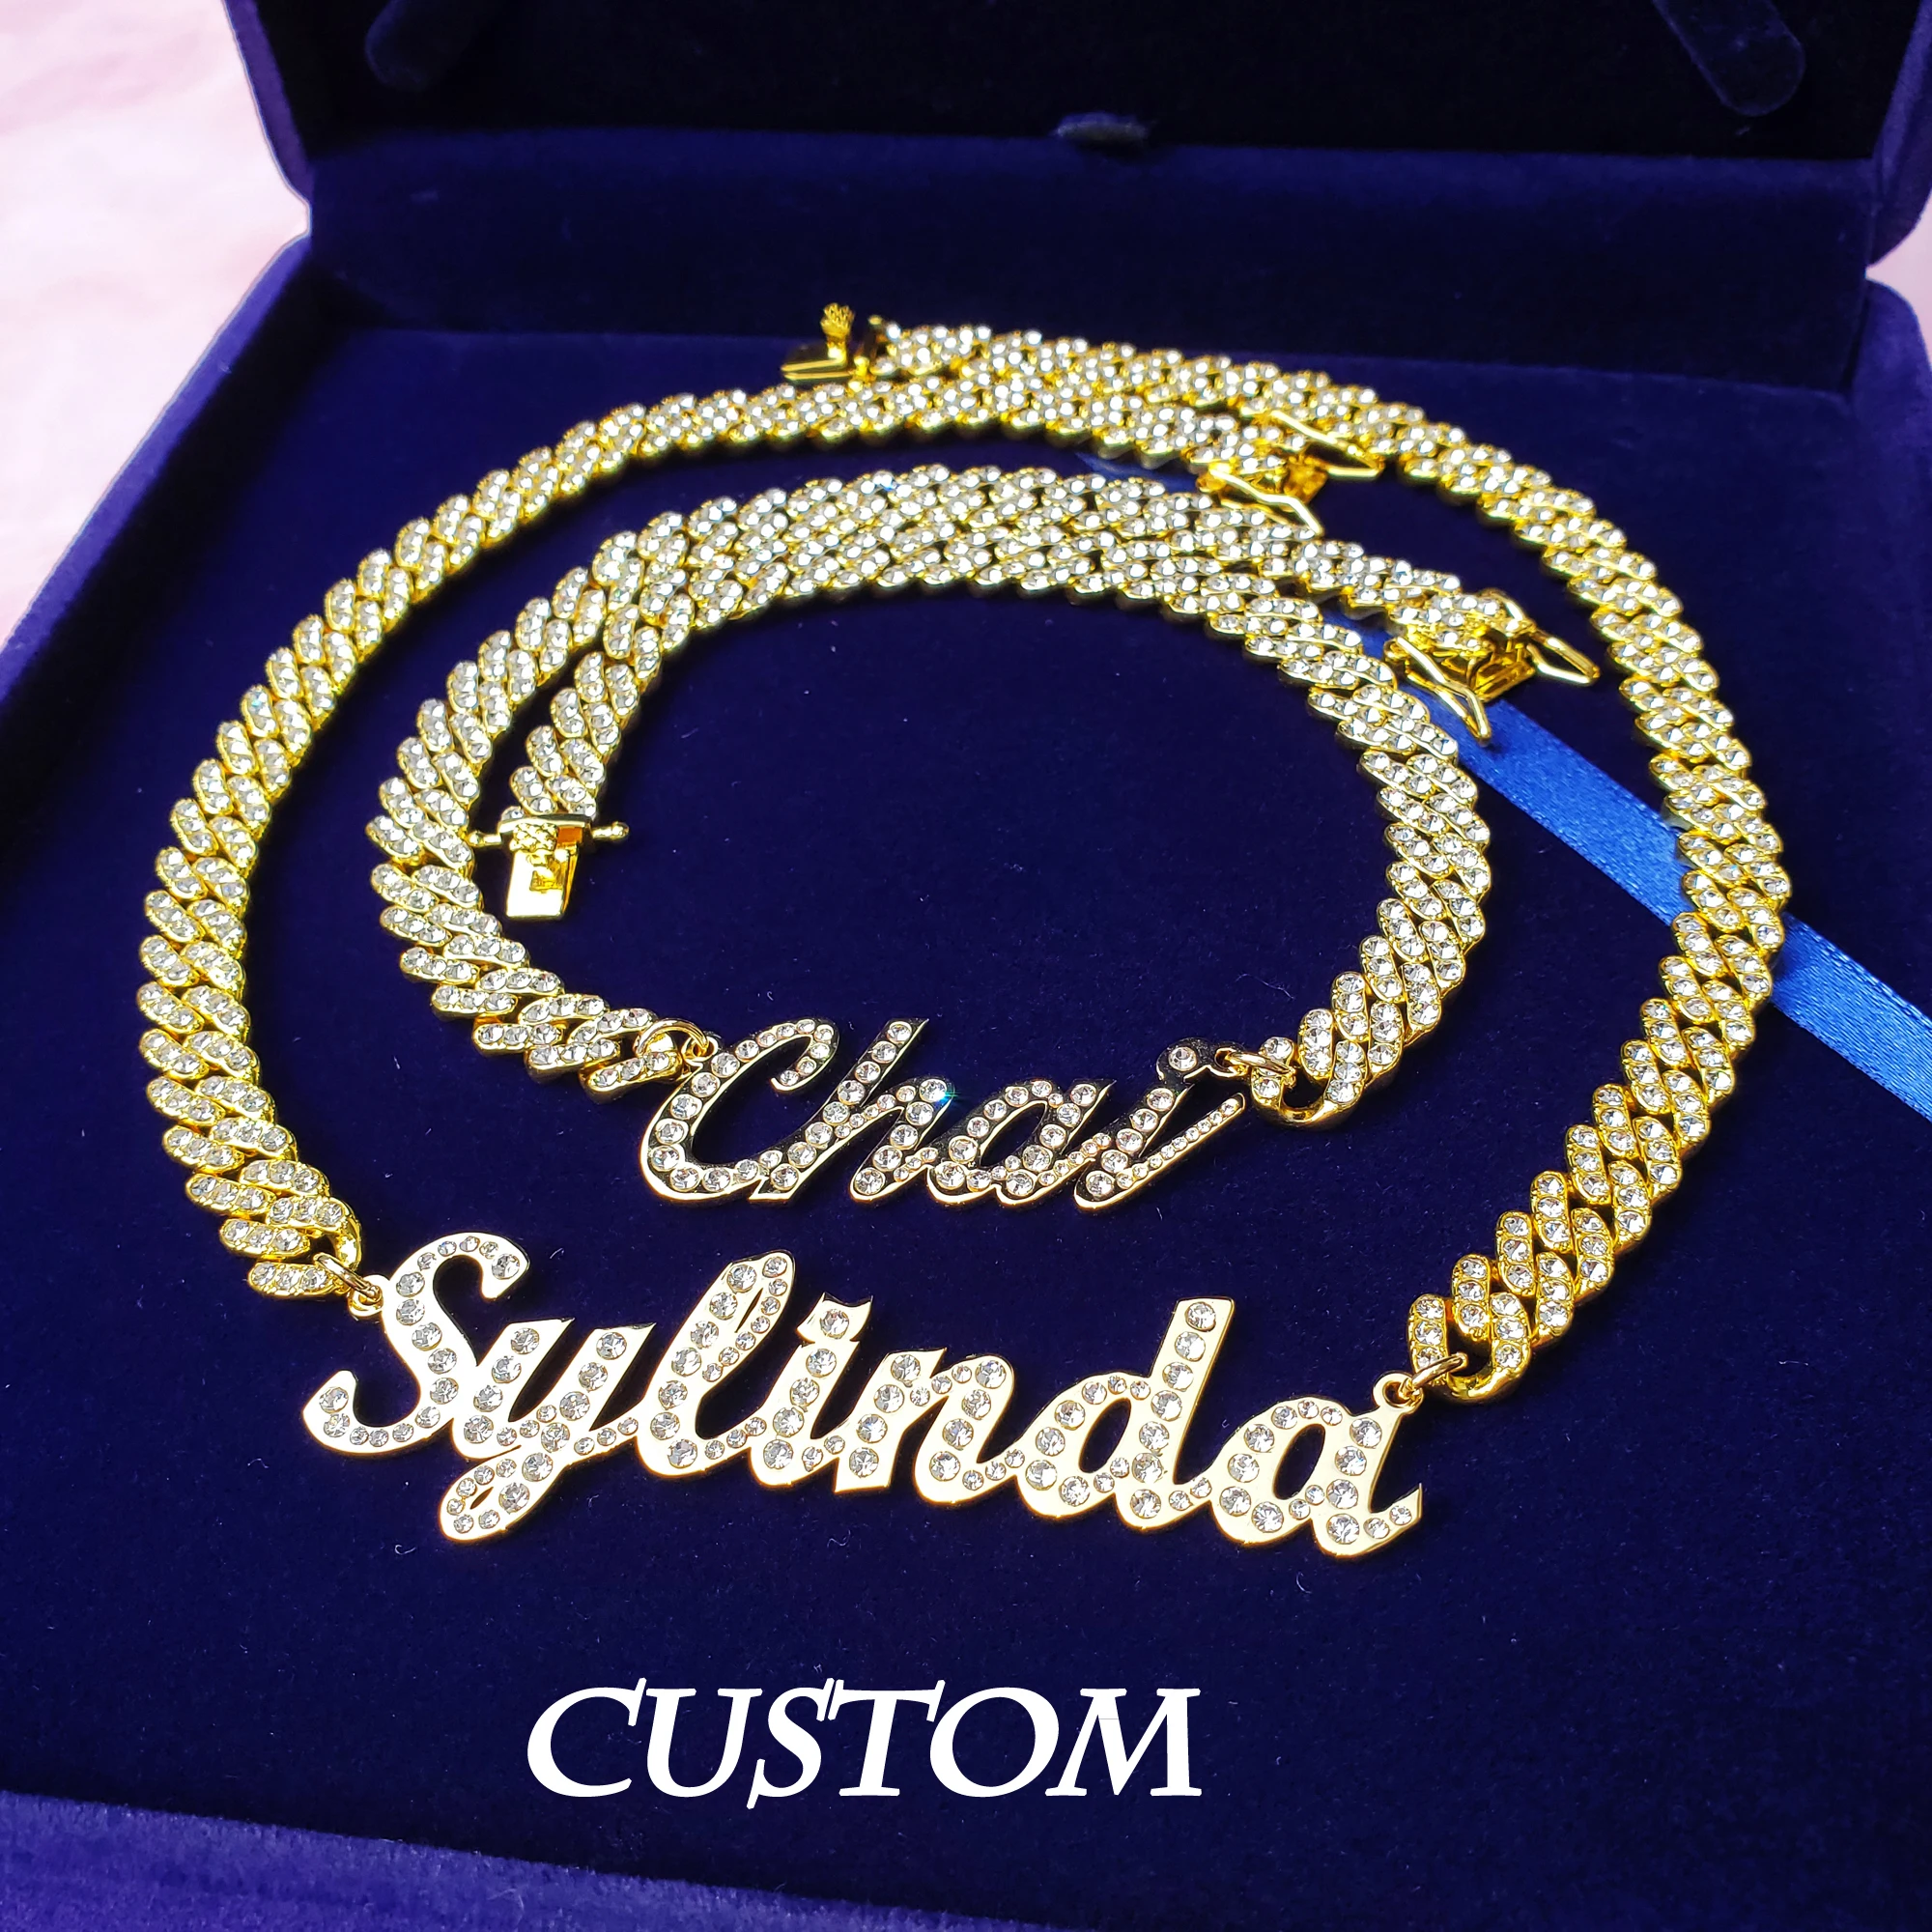 Personalized Name Necklace Stainless Steel with Rhinestone Cuban Chain Choker Necklace Perfect Gift for Her Part Prom Jewelry personalized name necklace stainless steel with rhinestone cuban chain choker necklace perfect gift for her part prom jewelry